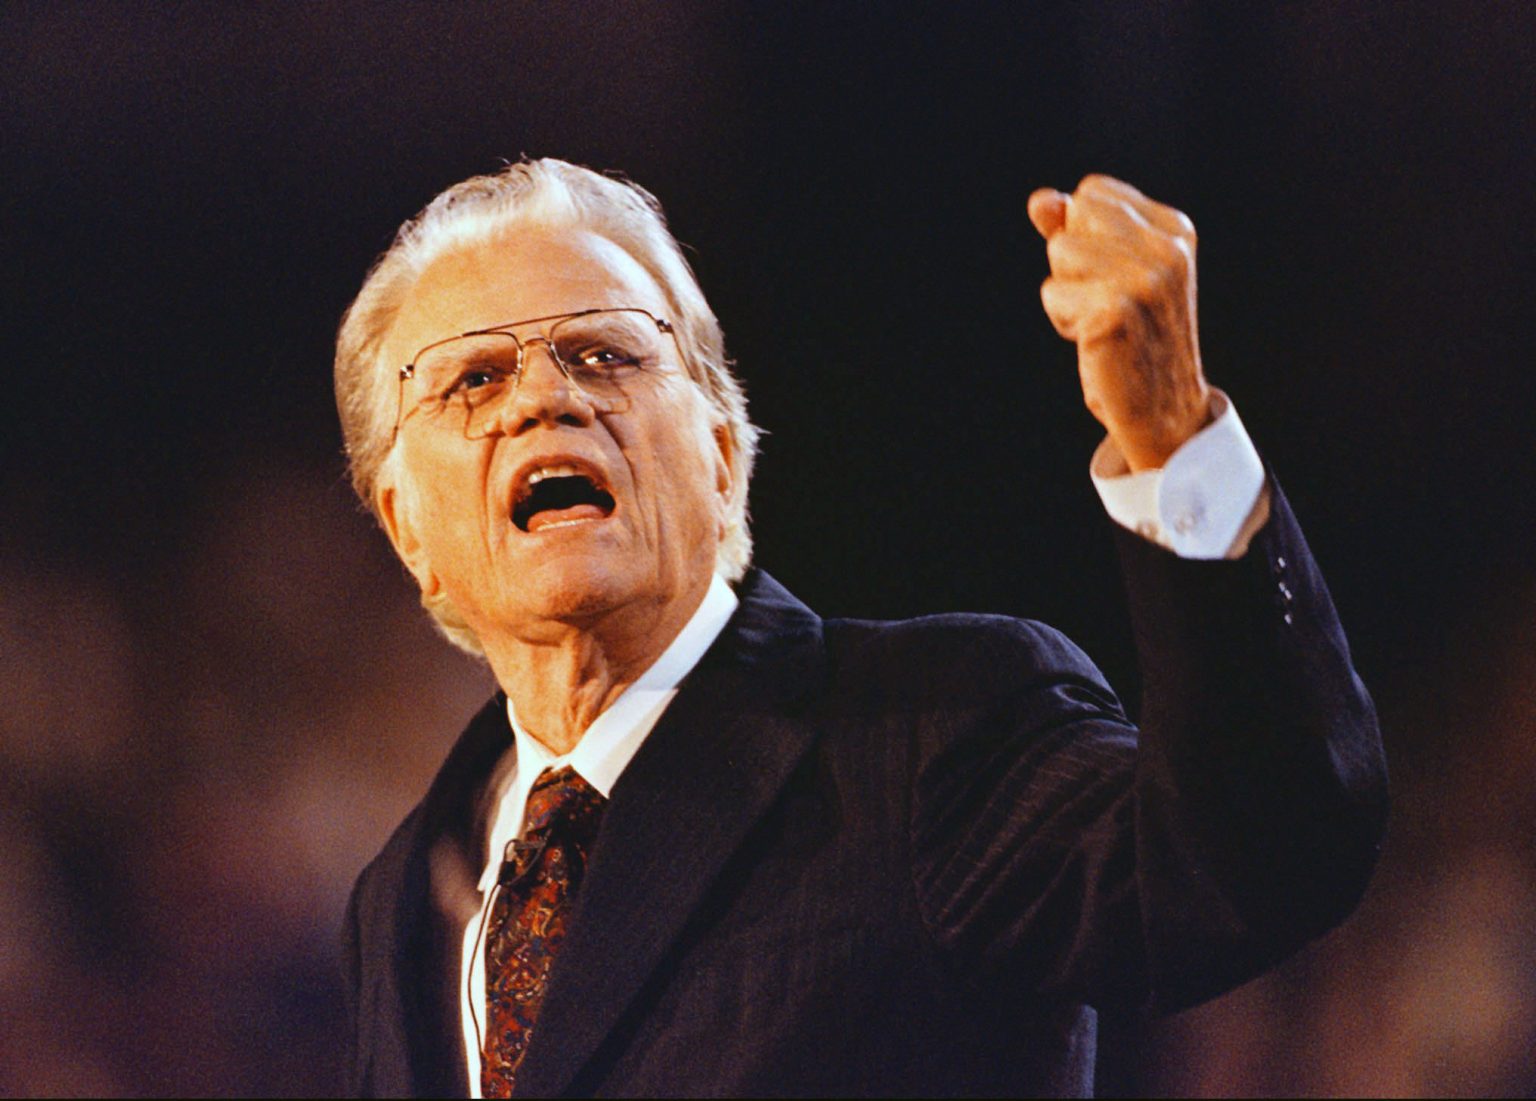 DOWNLOAD MP3: The Man God Uses by Evangelist BILLY GRAHAM (Sermon) 19